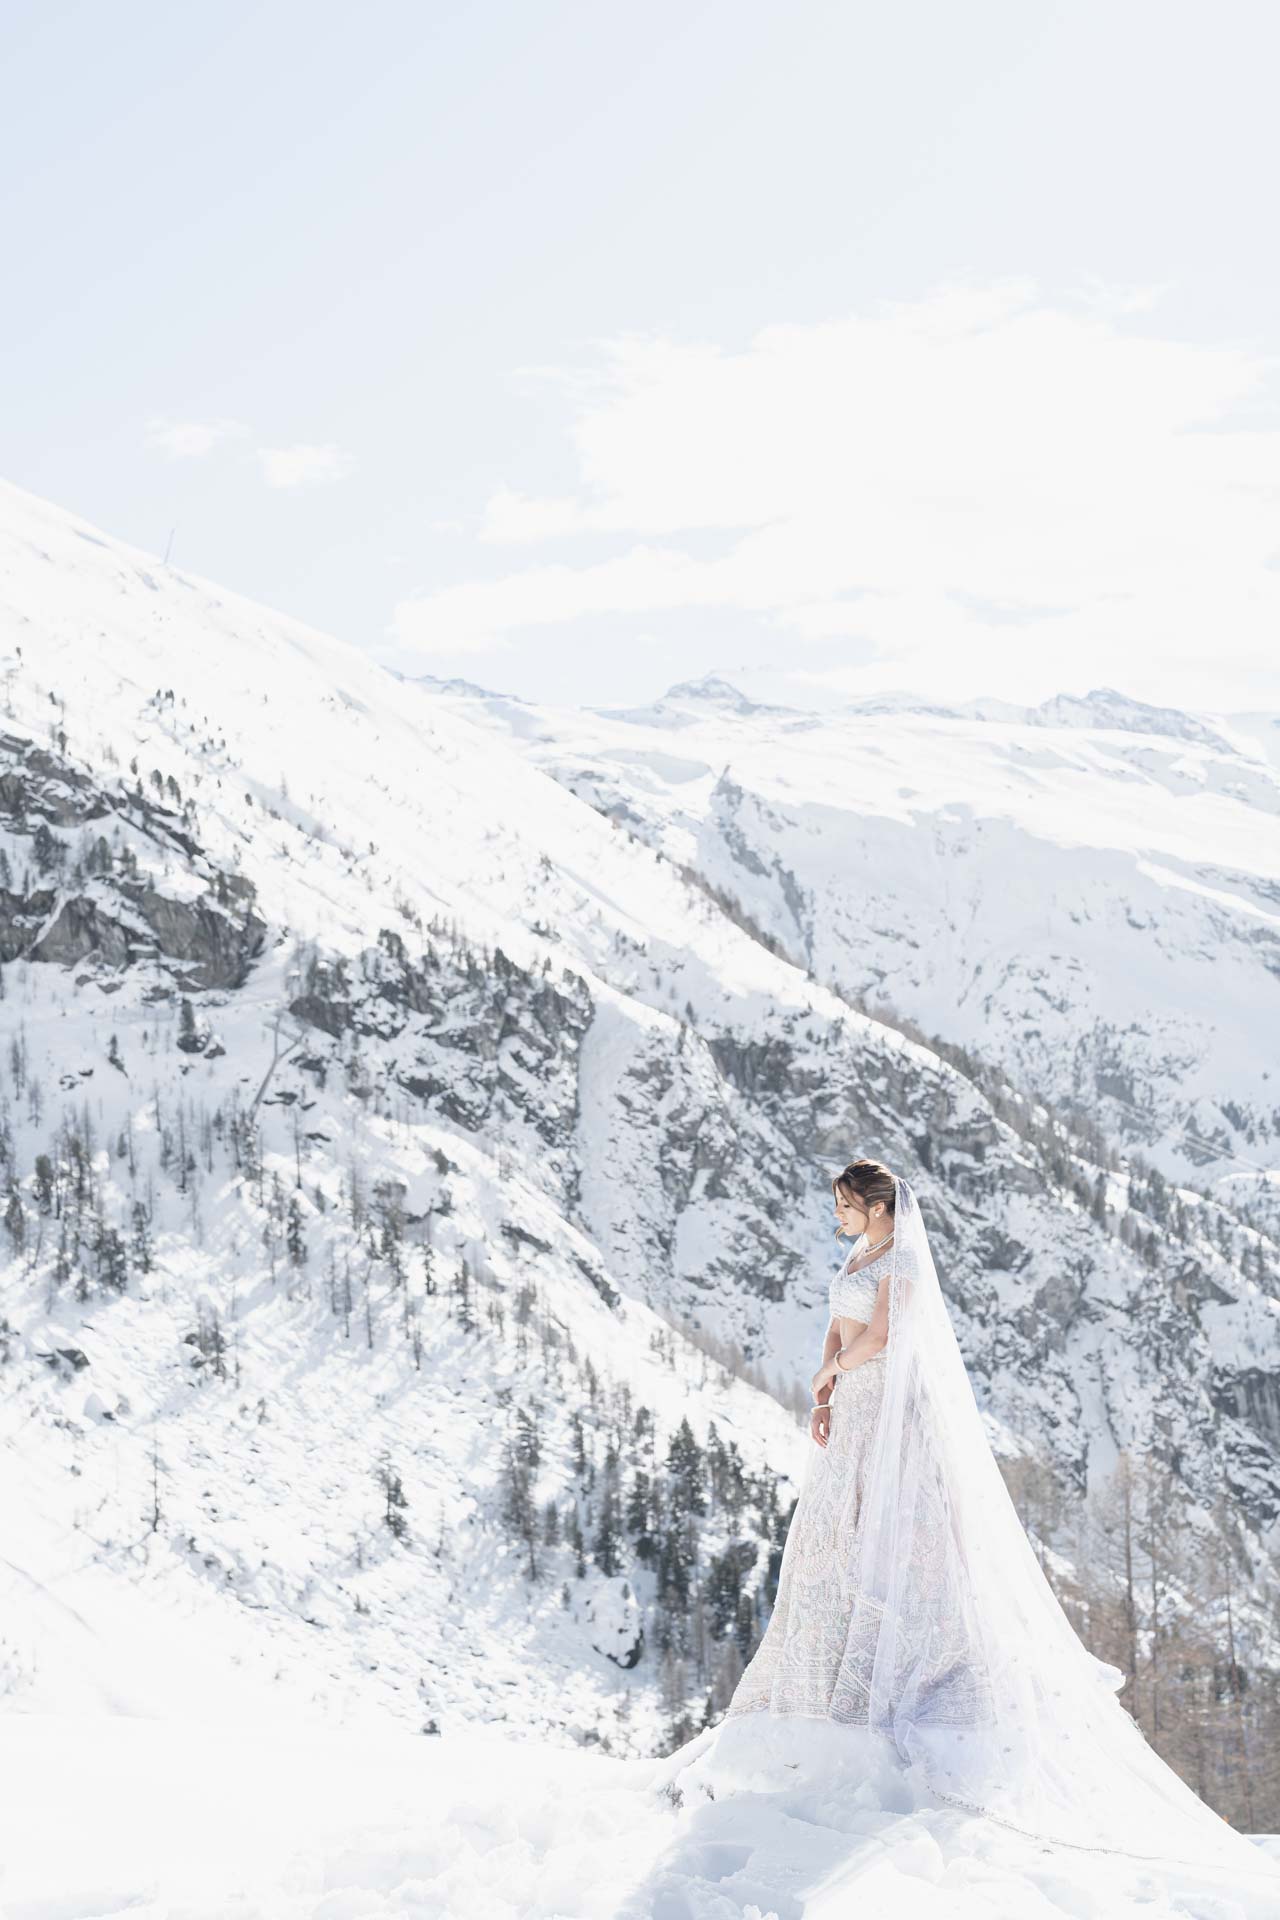 A wedding on the slopes of Matterhorn mountain, between the white of snow and the colors of India :: 2